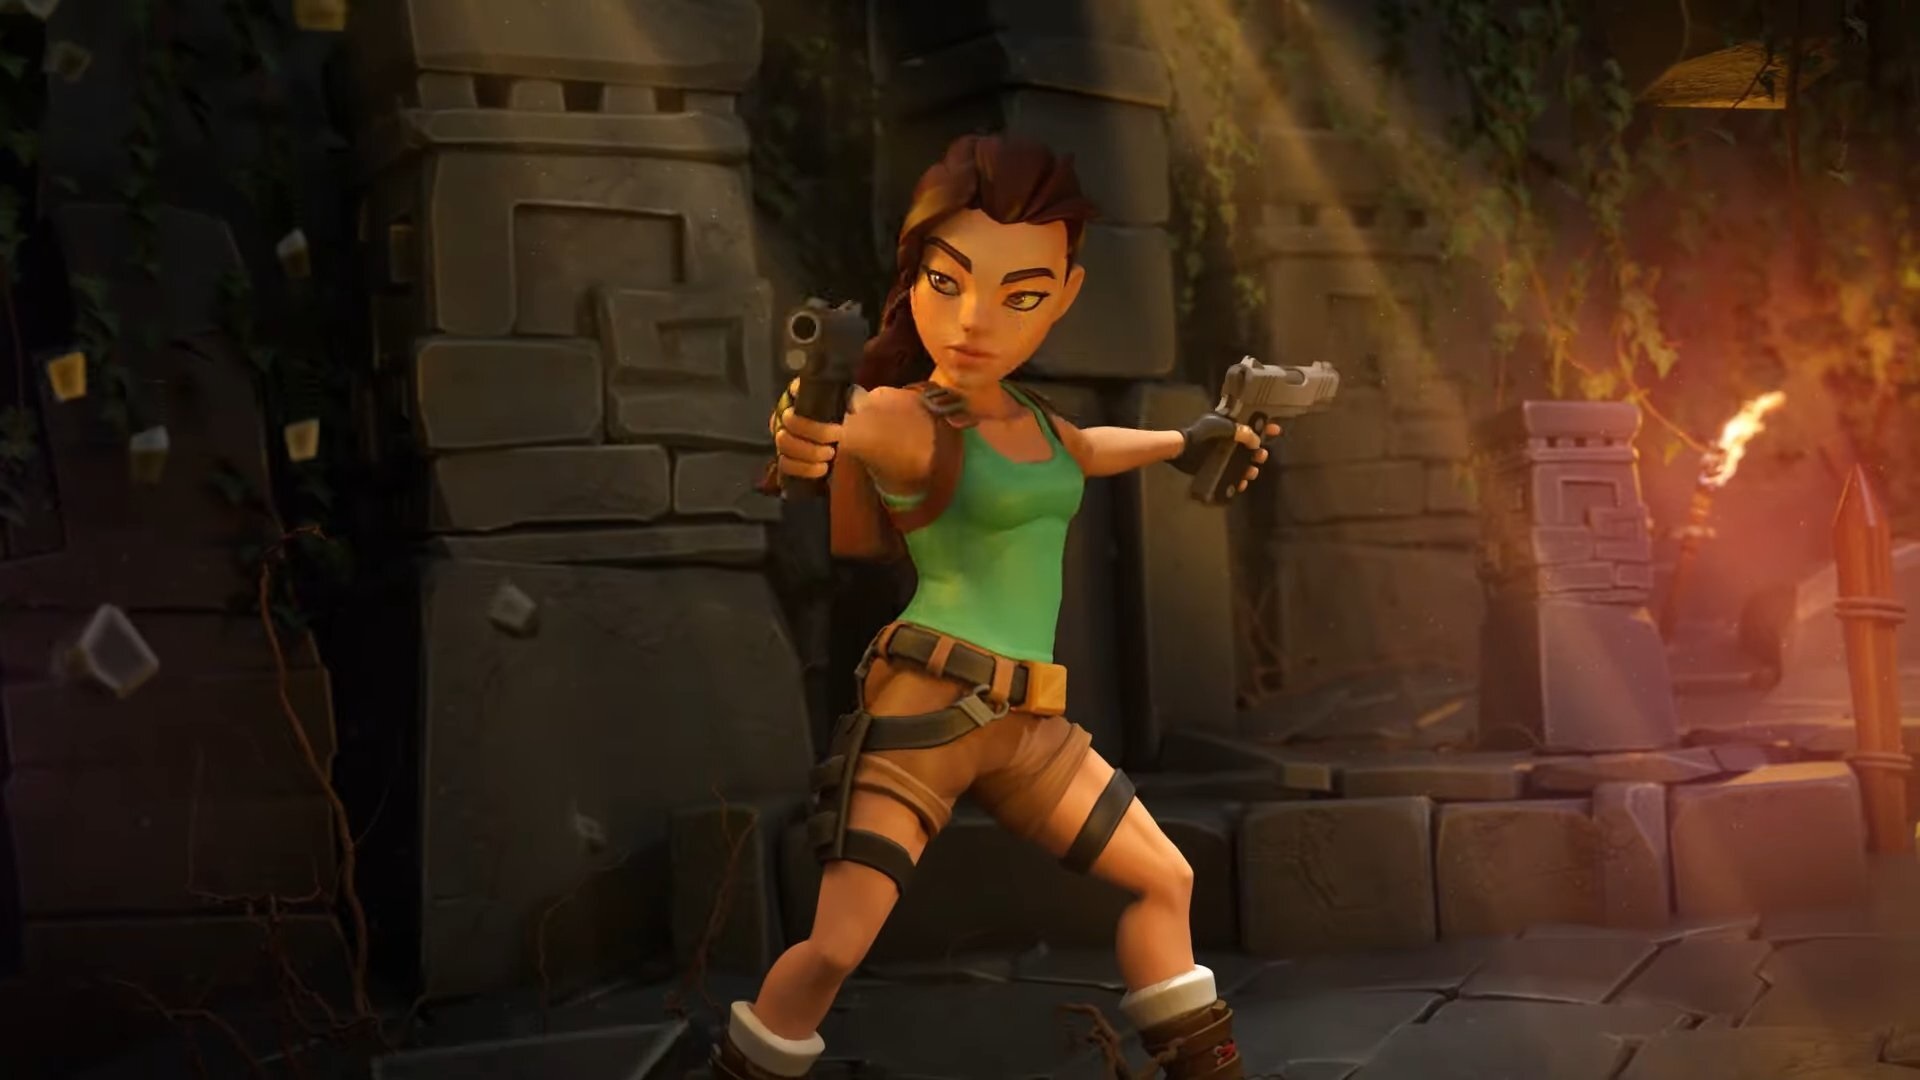 tomb raider reloaded release date